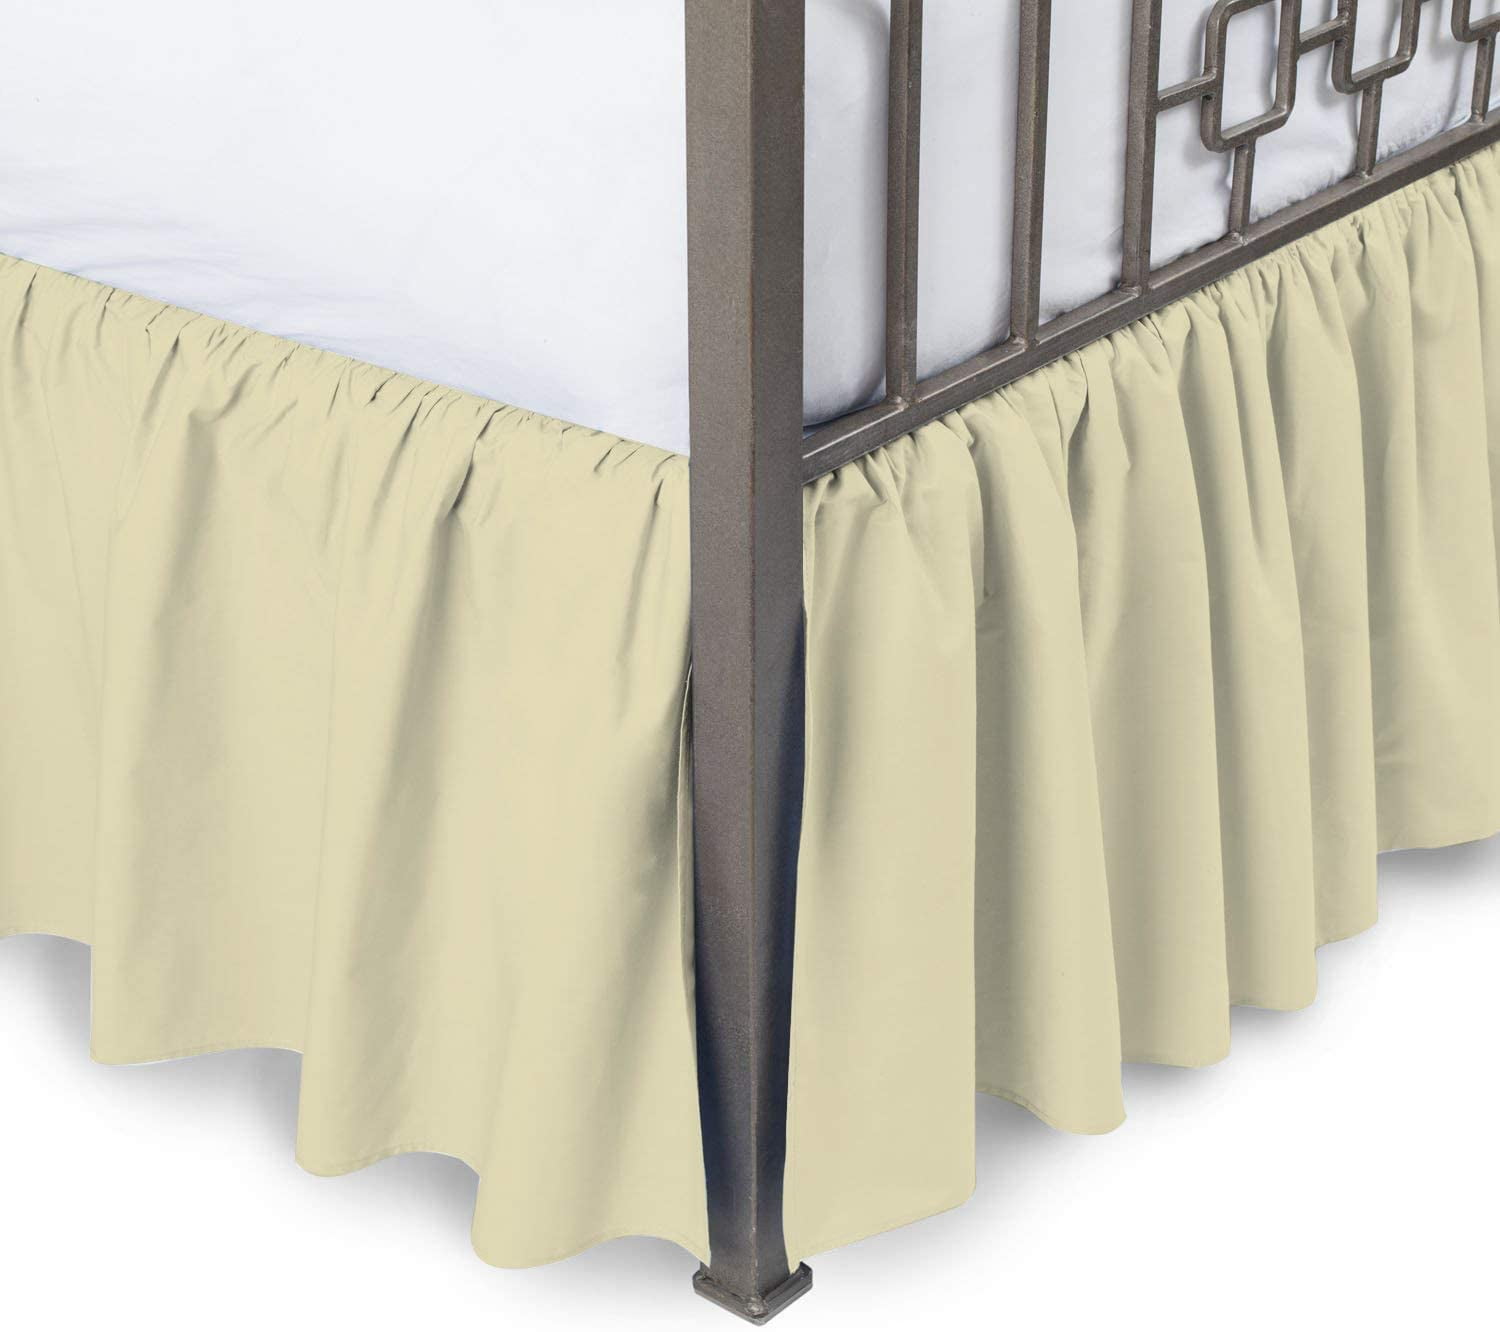 IVORY STRIPED TAILORED BED SKIRT 1000 TC 100% COTTON CHOOSE DROP LENGTH AND SIZE 